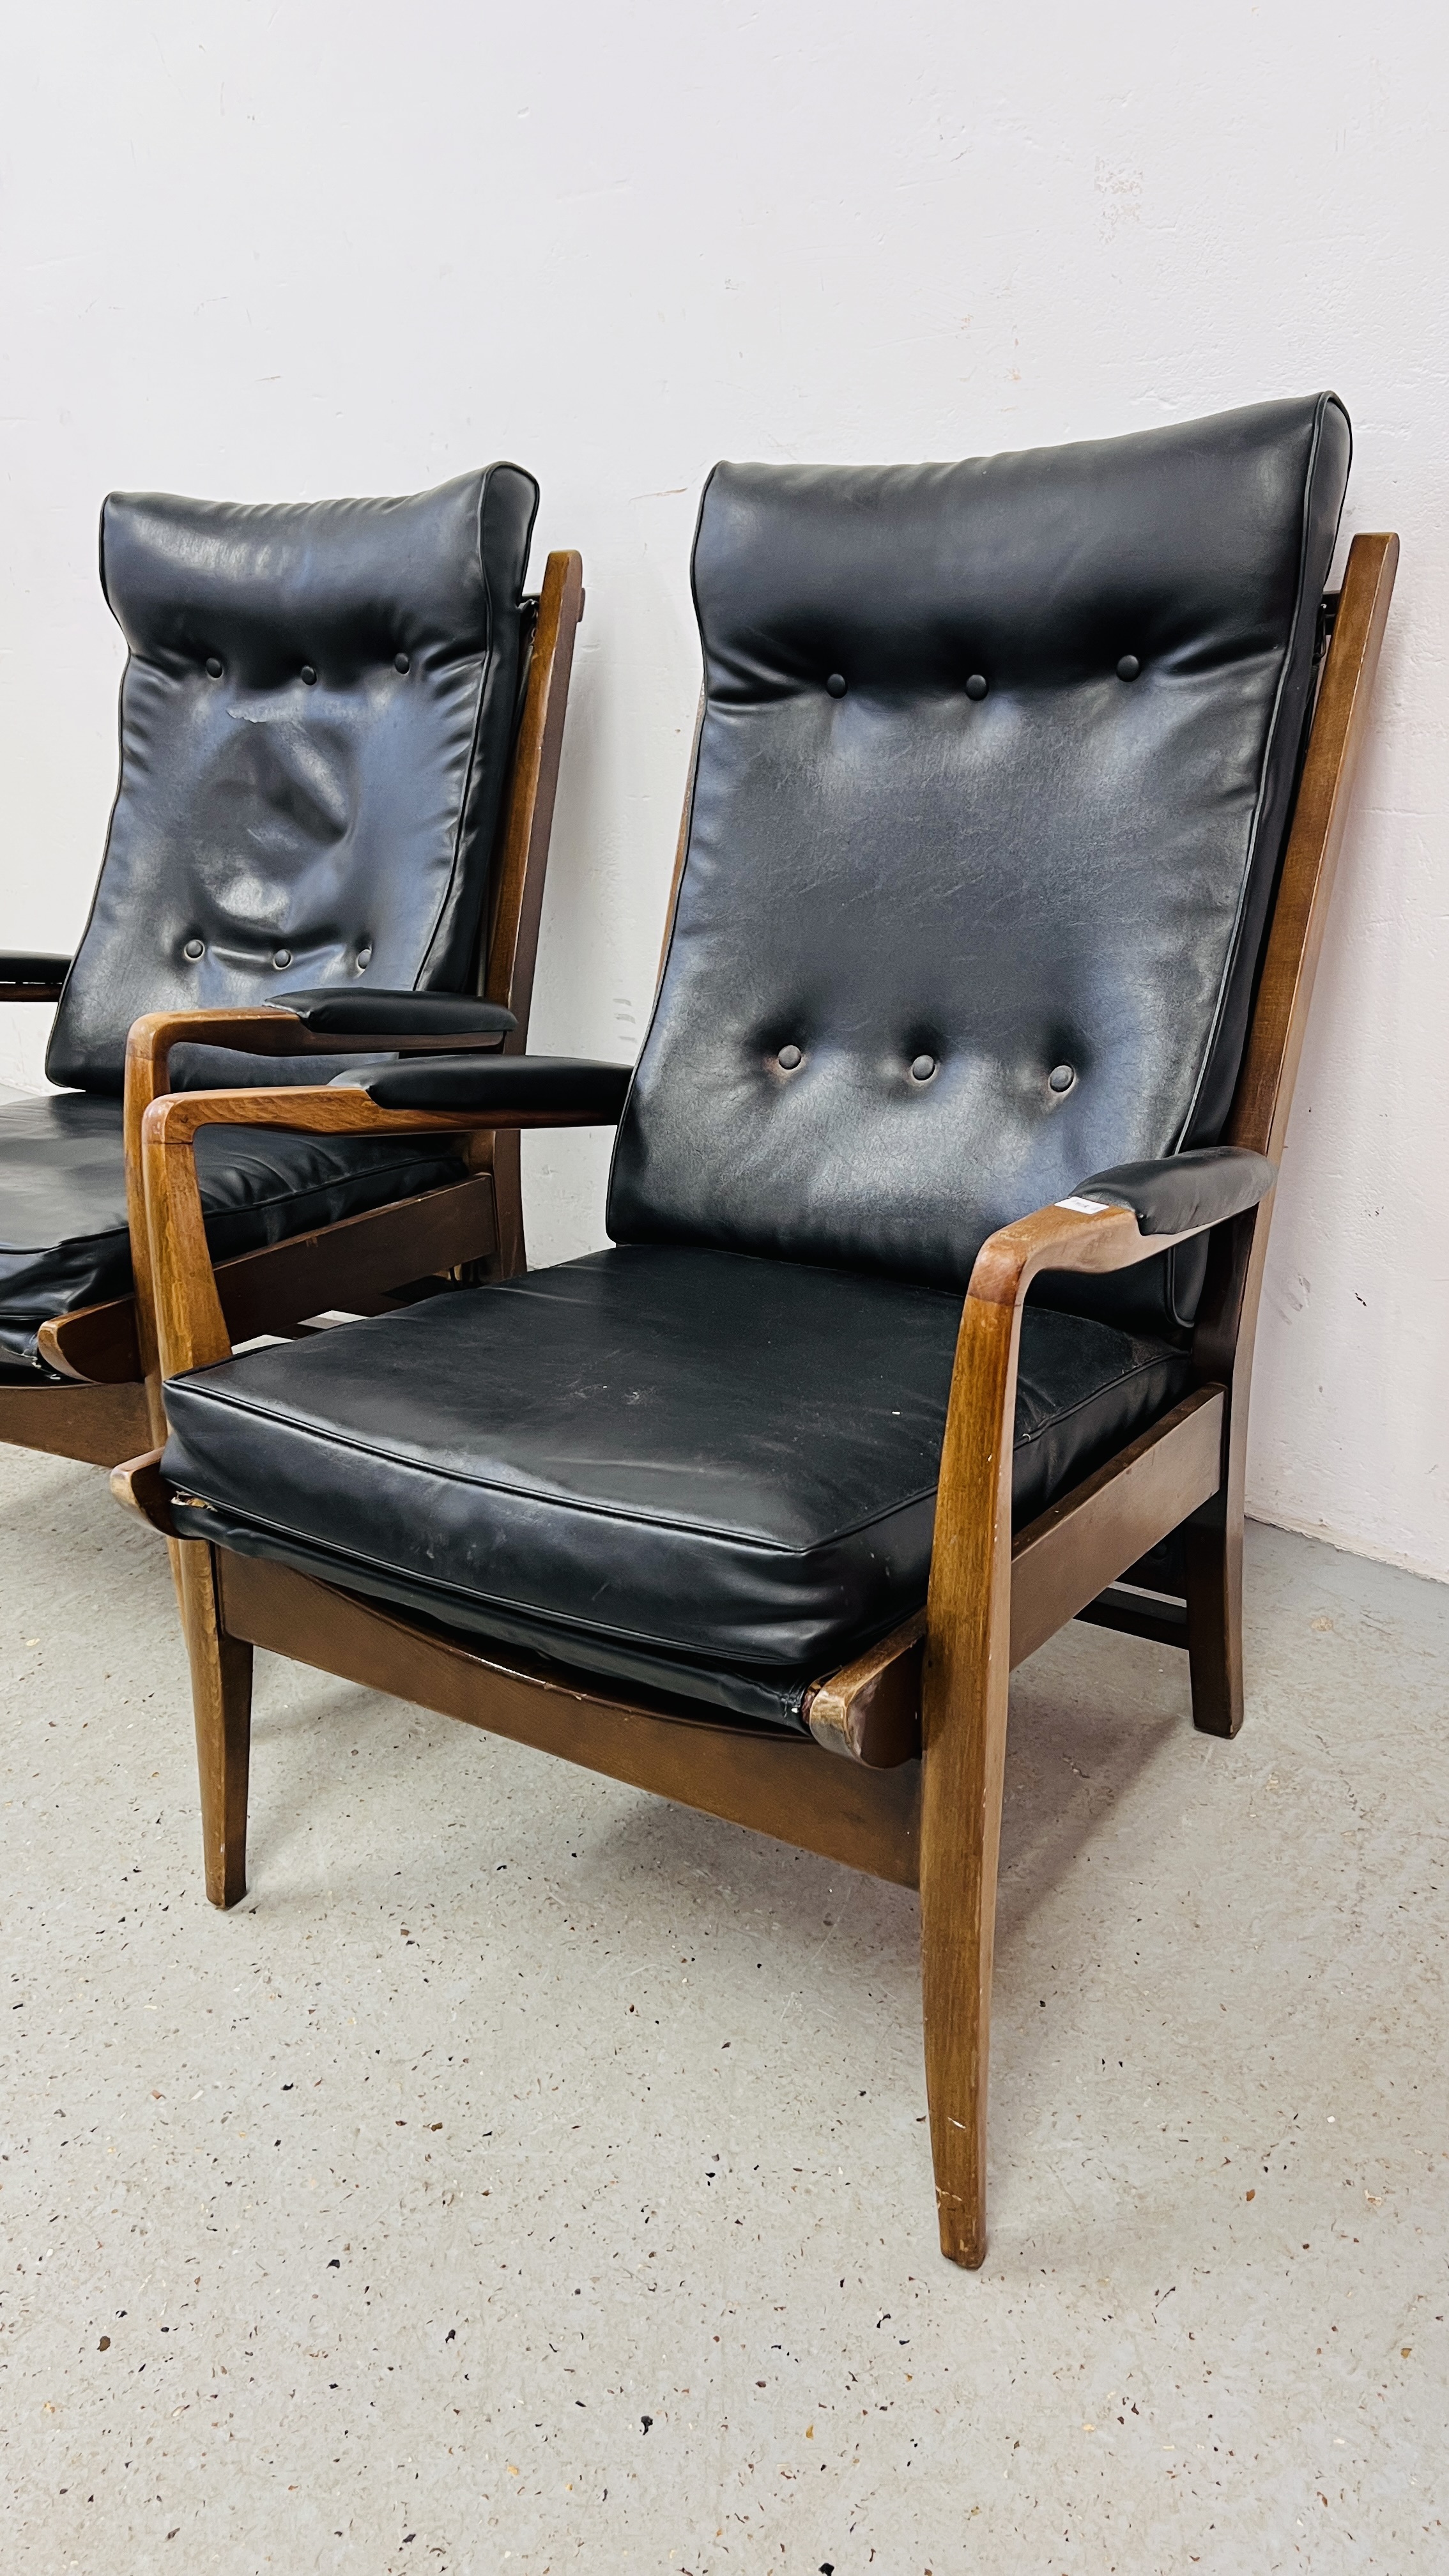 A PAIR OF RETRO CONTEMPORARY BLACK FAUX LEATHER EASY STYLE CHAIR BEARING ORIGINAL MAKERS LABEL - Image 2 of 19